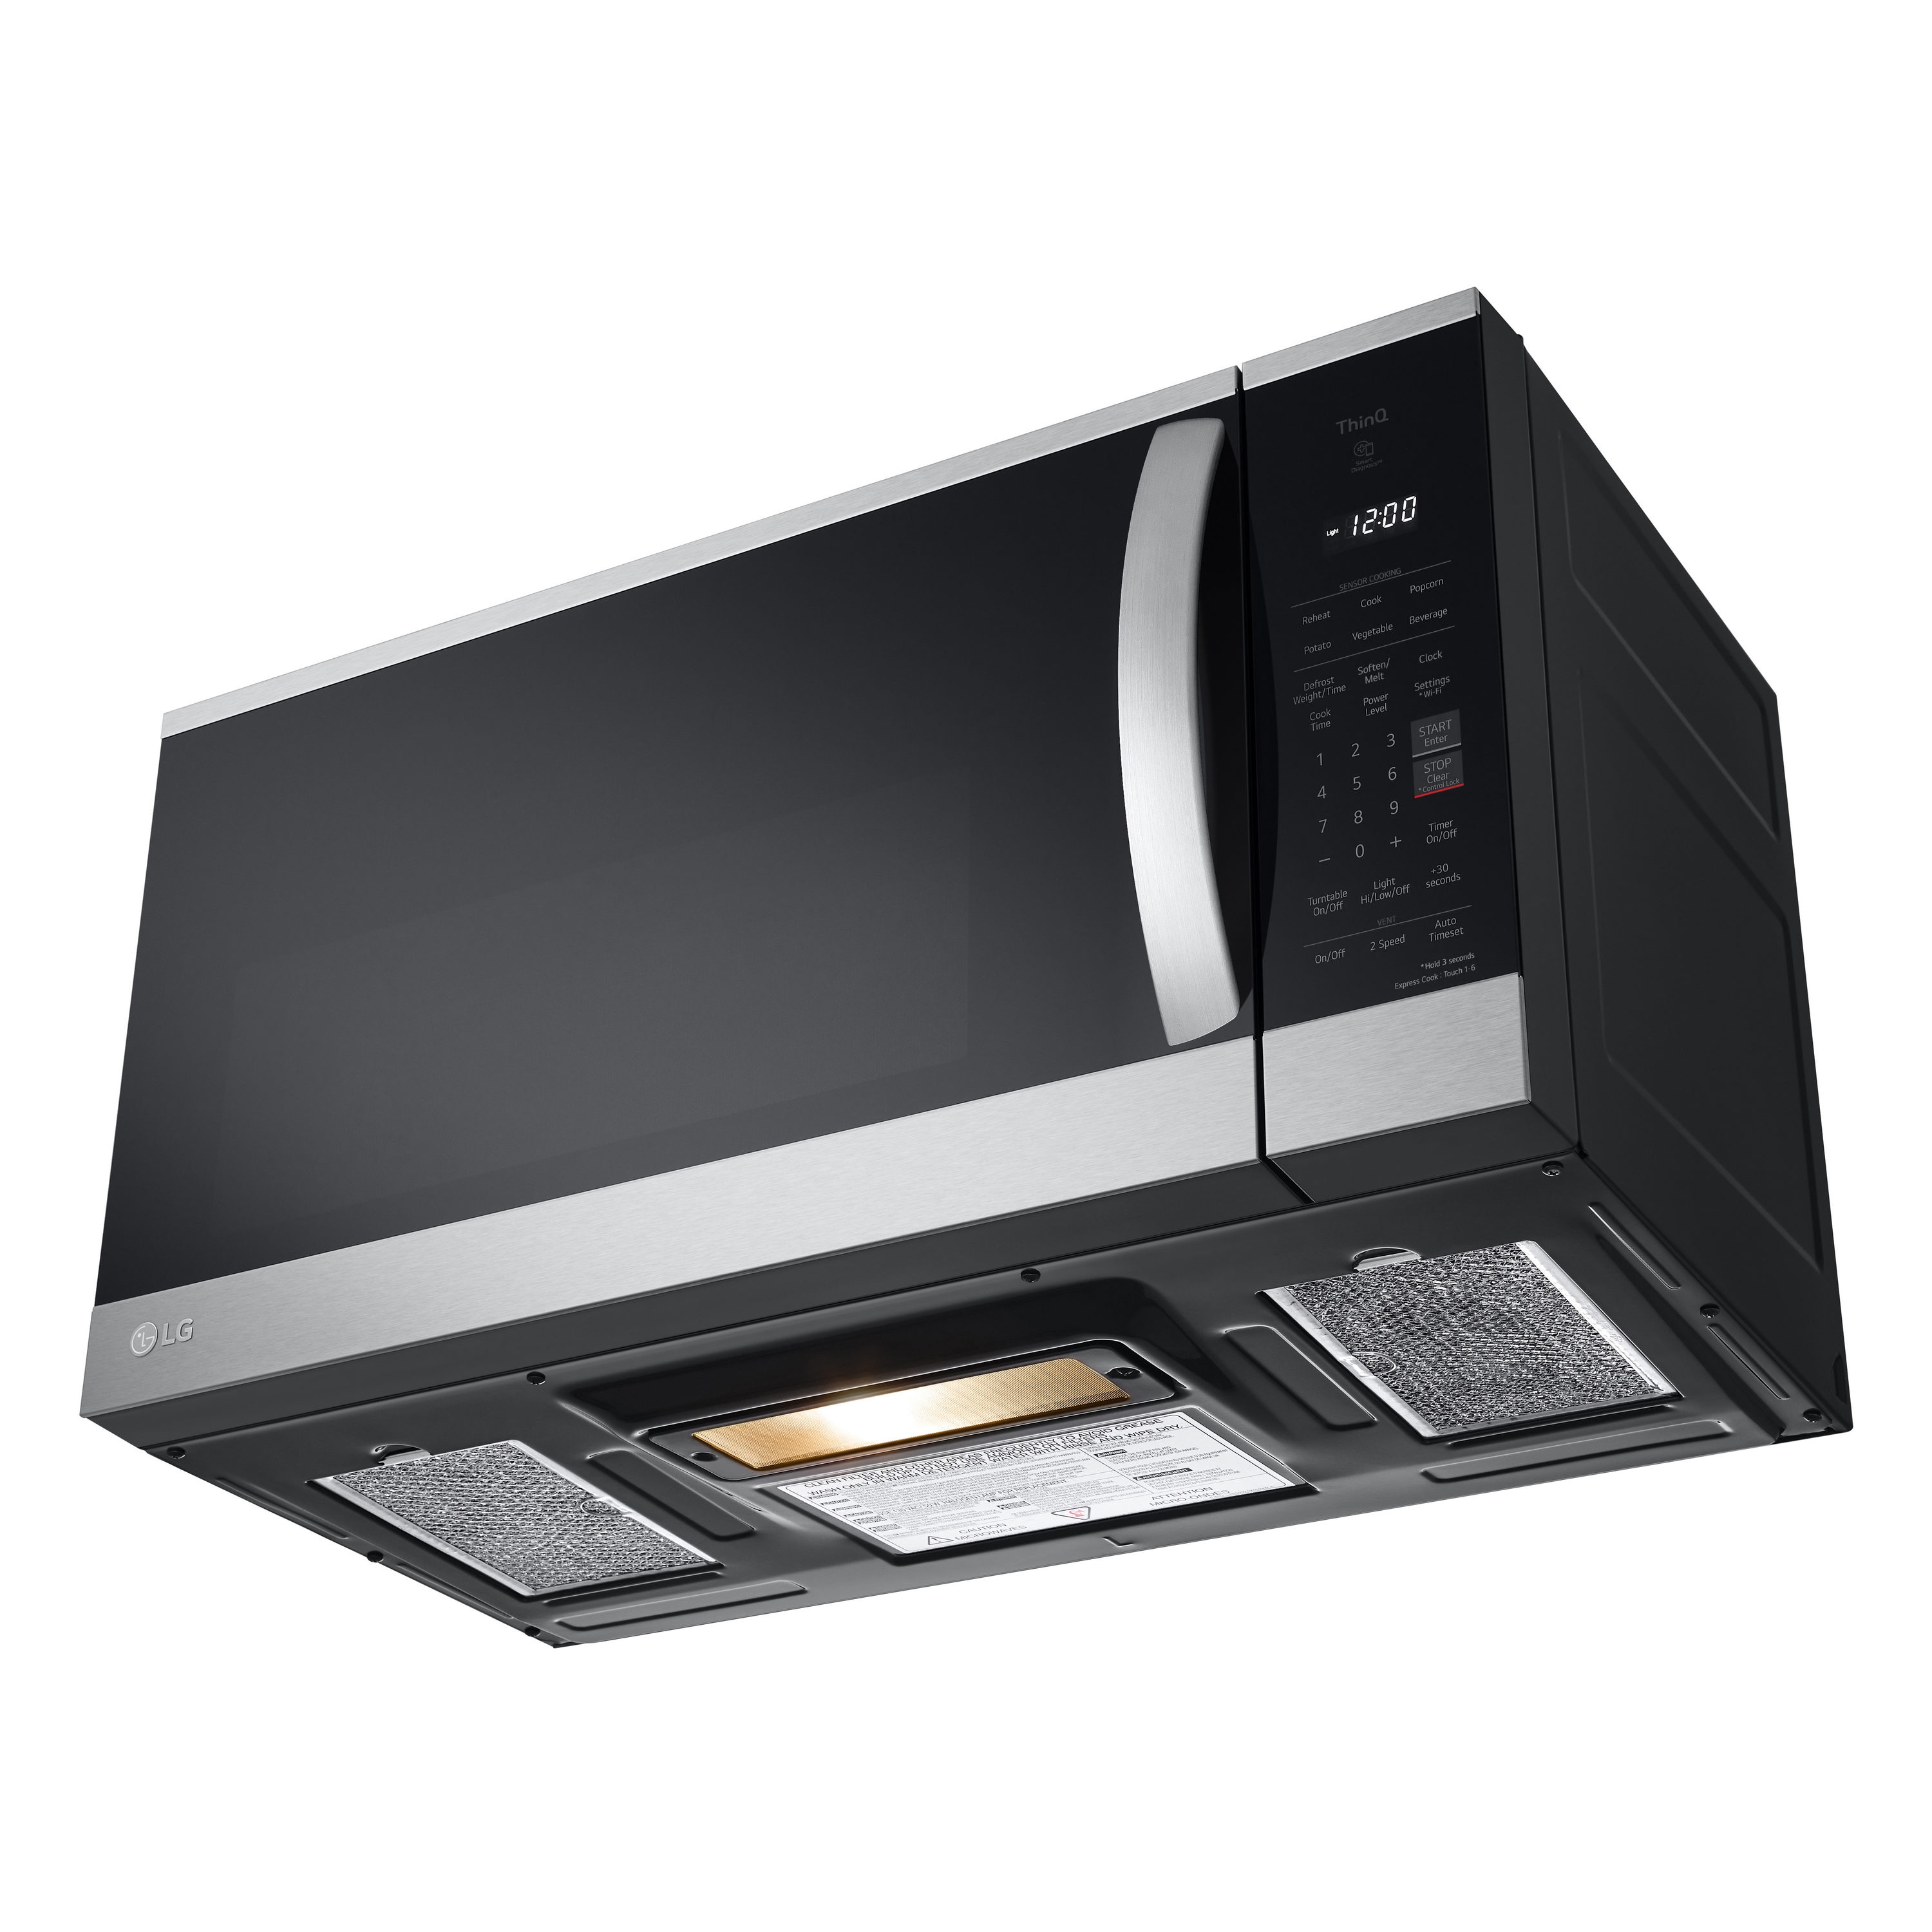 Sensor with Steel) in Over-the-Range (Printproof department LG at Stainless ft Microwaves the 1000-Watt Cooking 1.8-cu Over-the-Range Smart Microwave